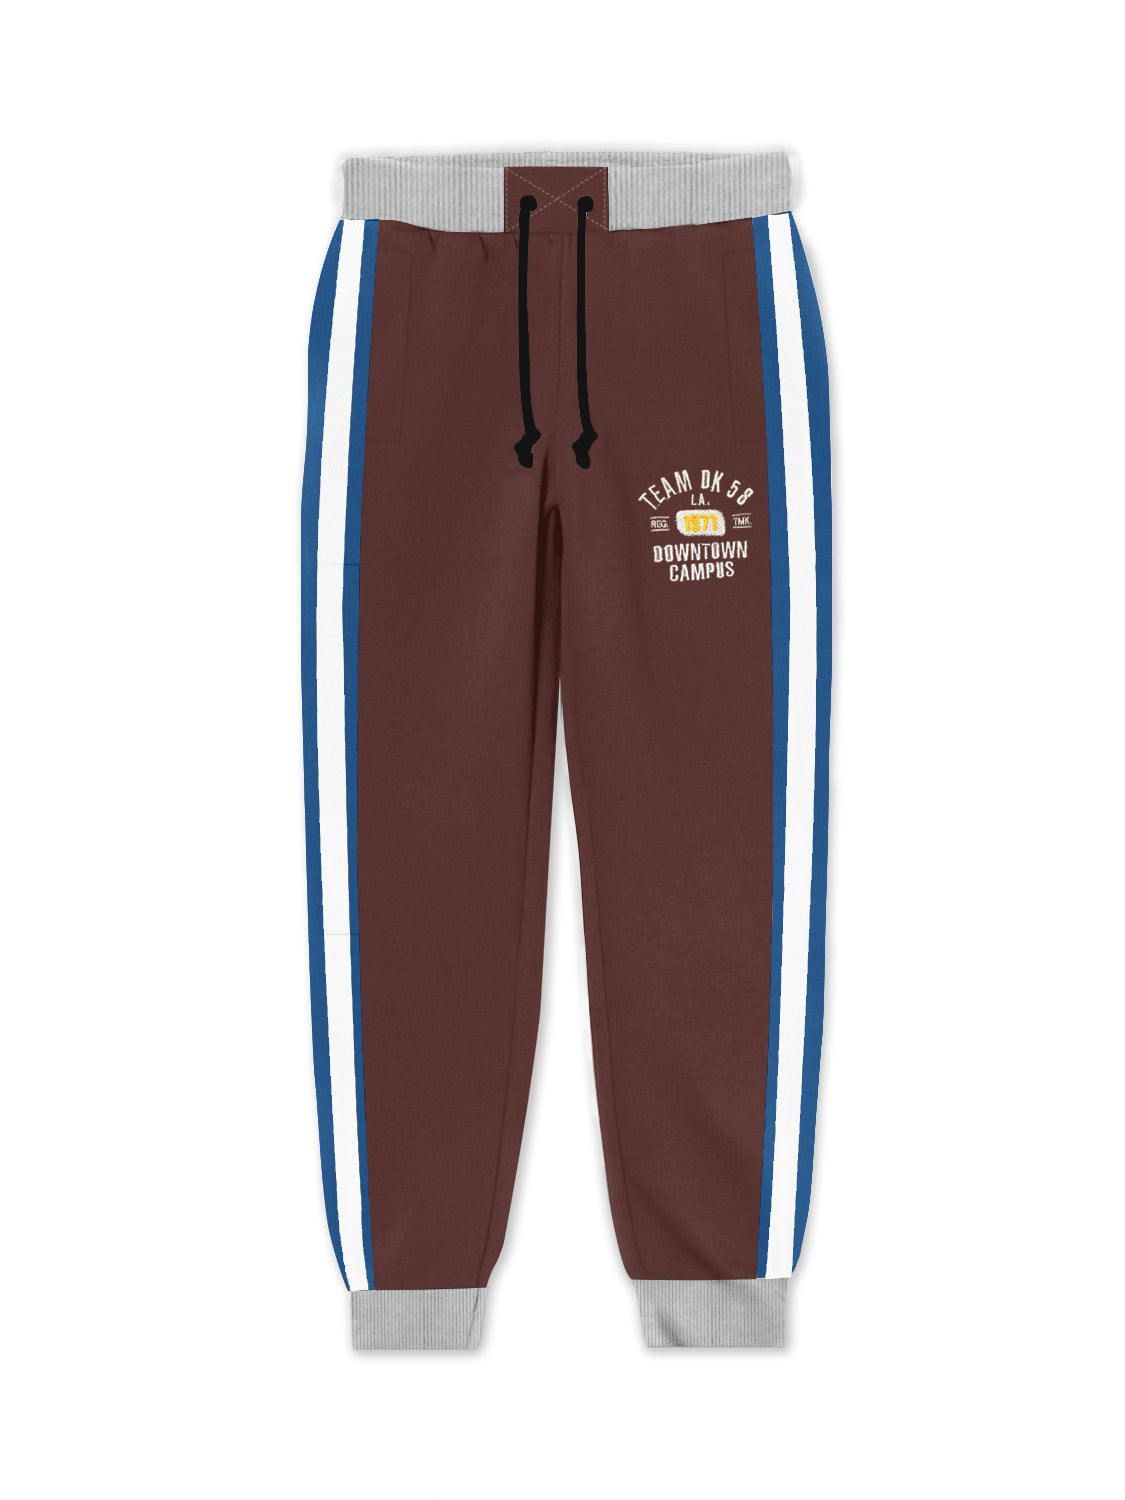 Drift King Slim Fit Fleece Jogger Trouser For Kids-Maroon And Grey with Assorted Stripes-SP925